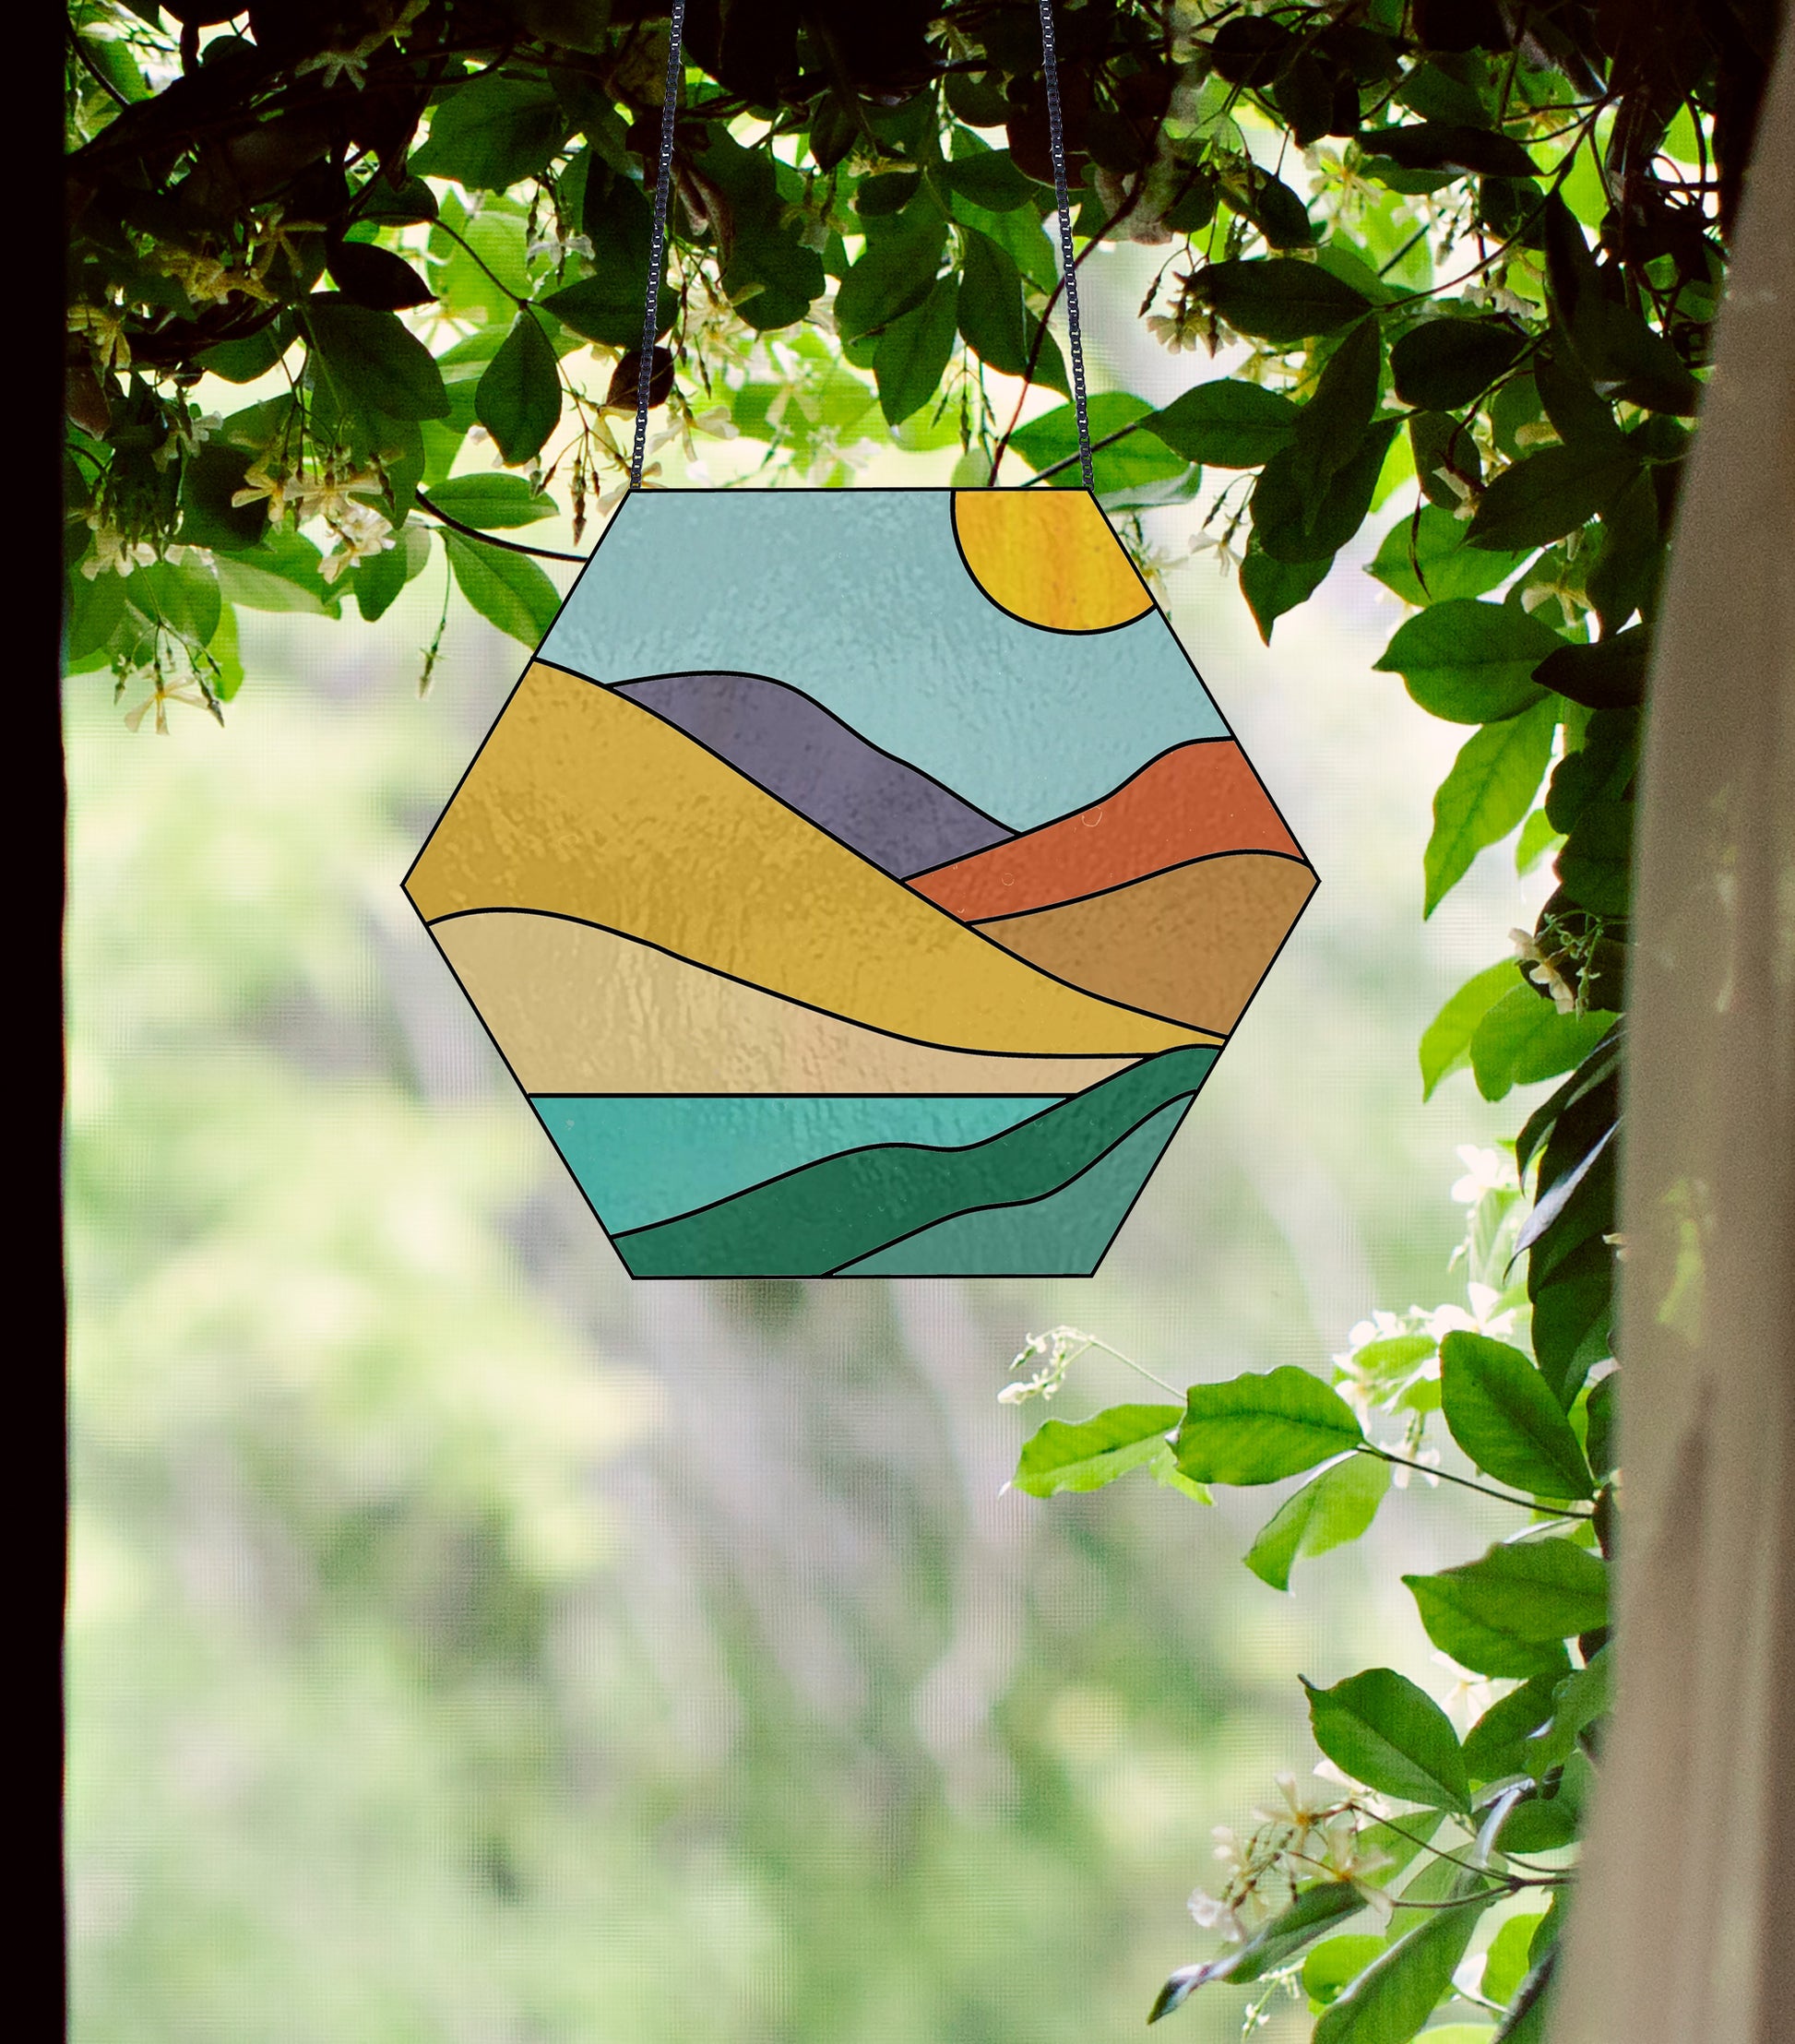 Stained glass pattern for a boho landscape hexagon, instant PDF download, shown in a window with ivy